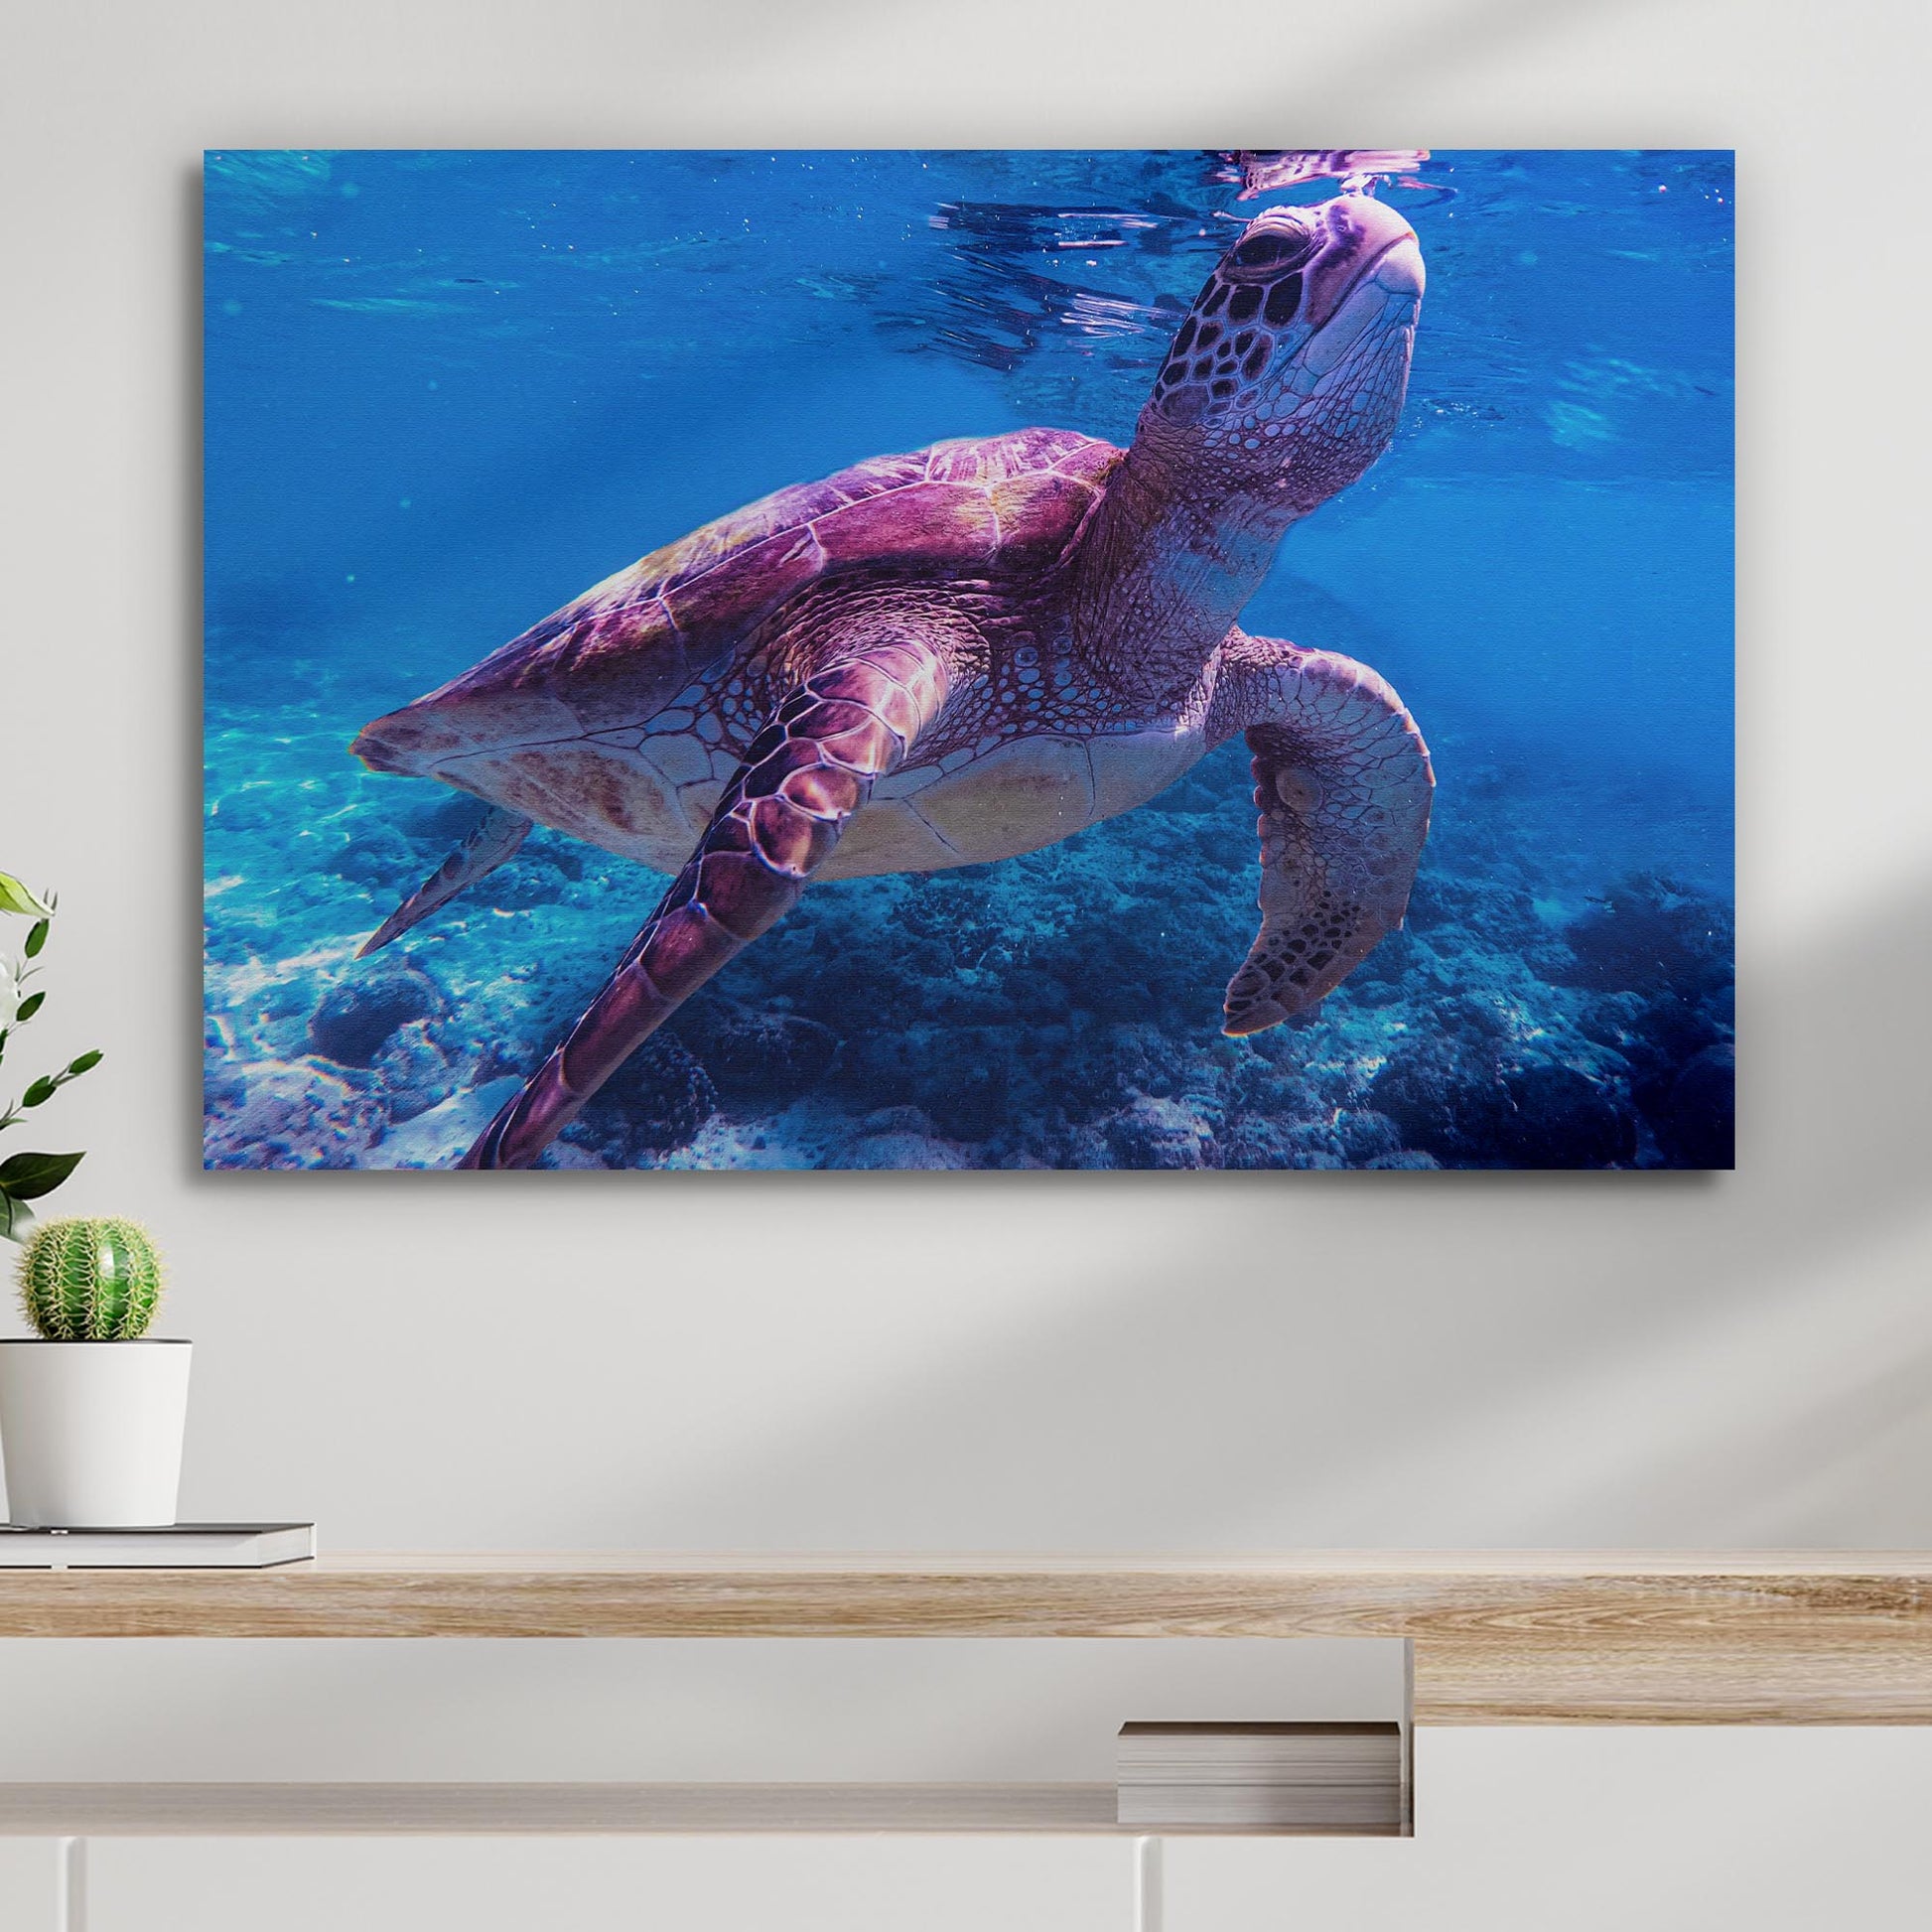 Sea Turtle Swimming Canvas Wall Art Style 2 - Image by Tailored Canvases